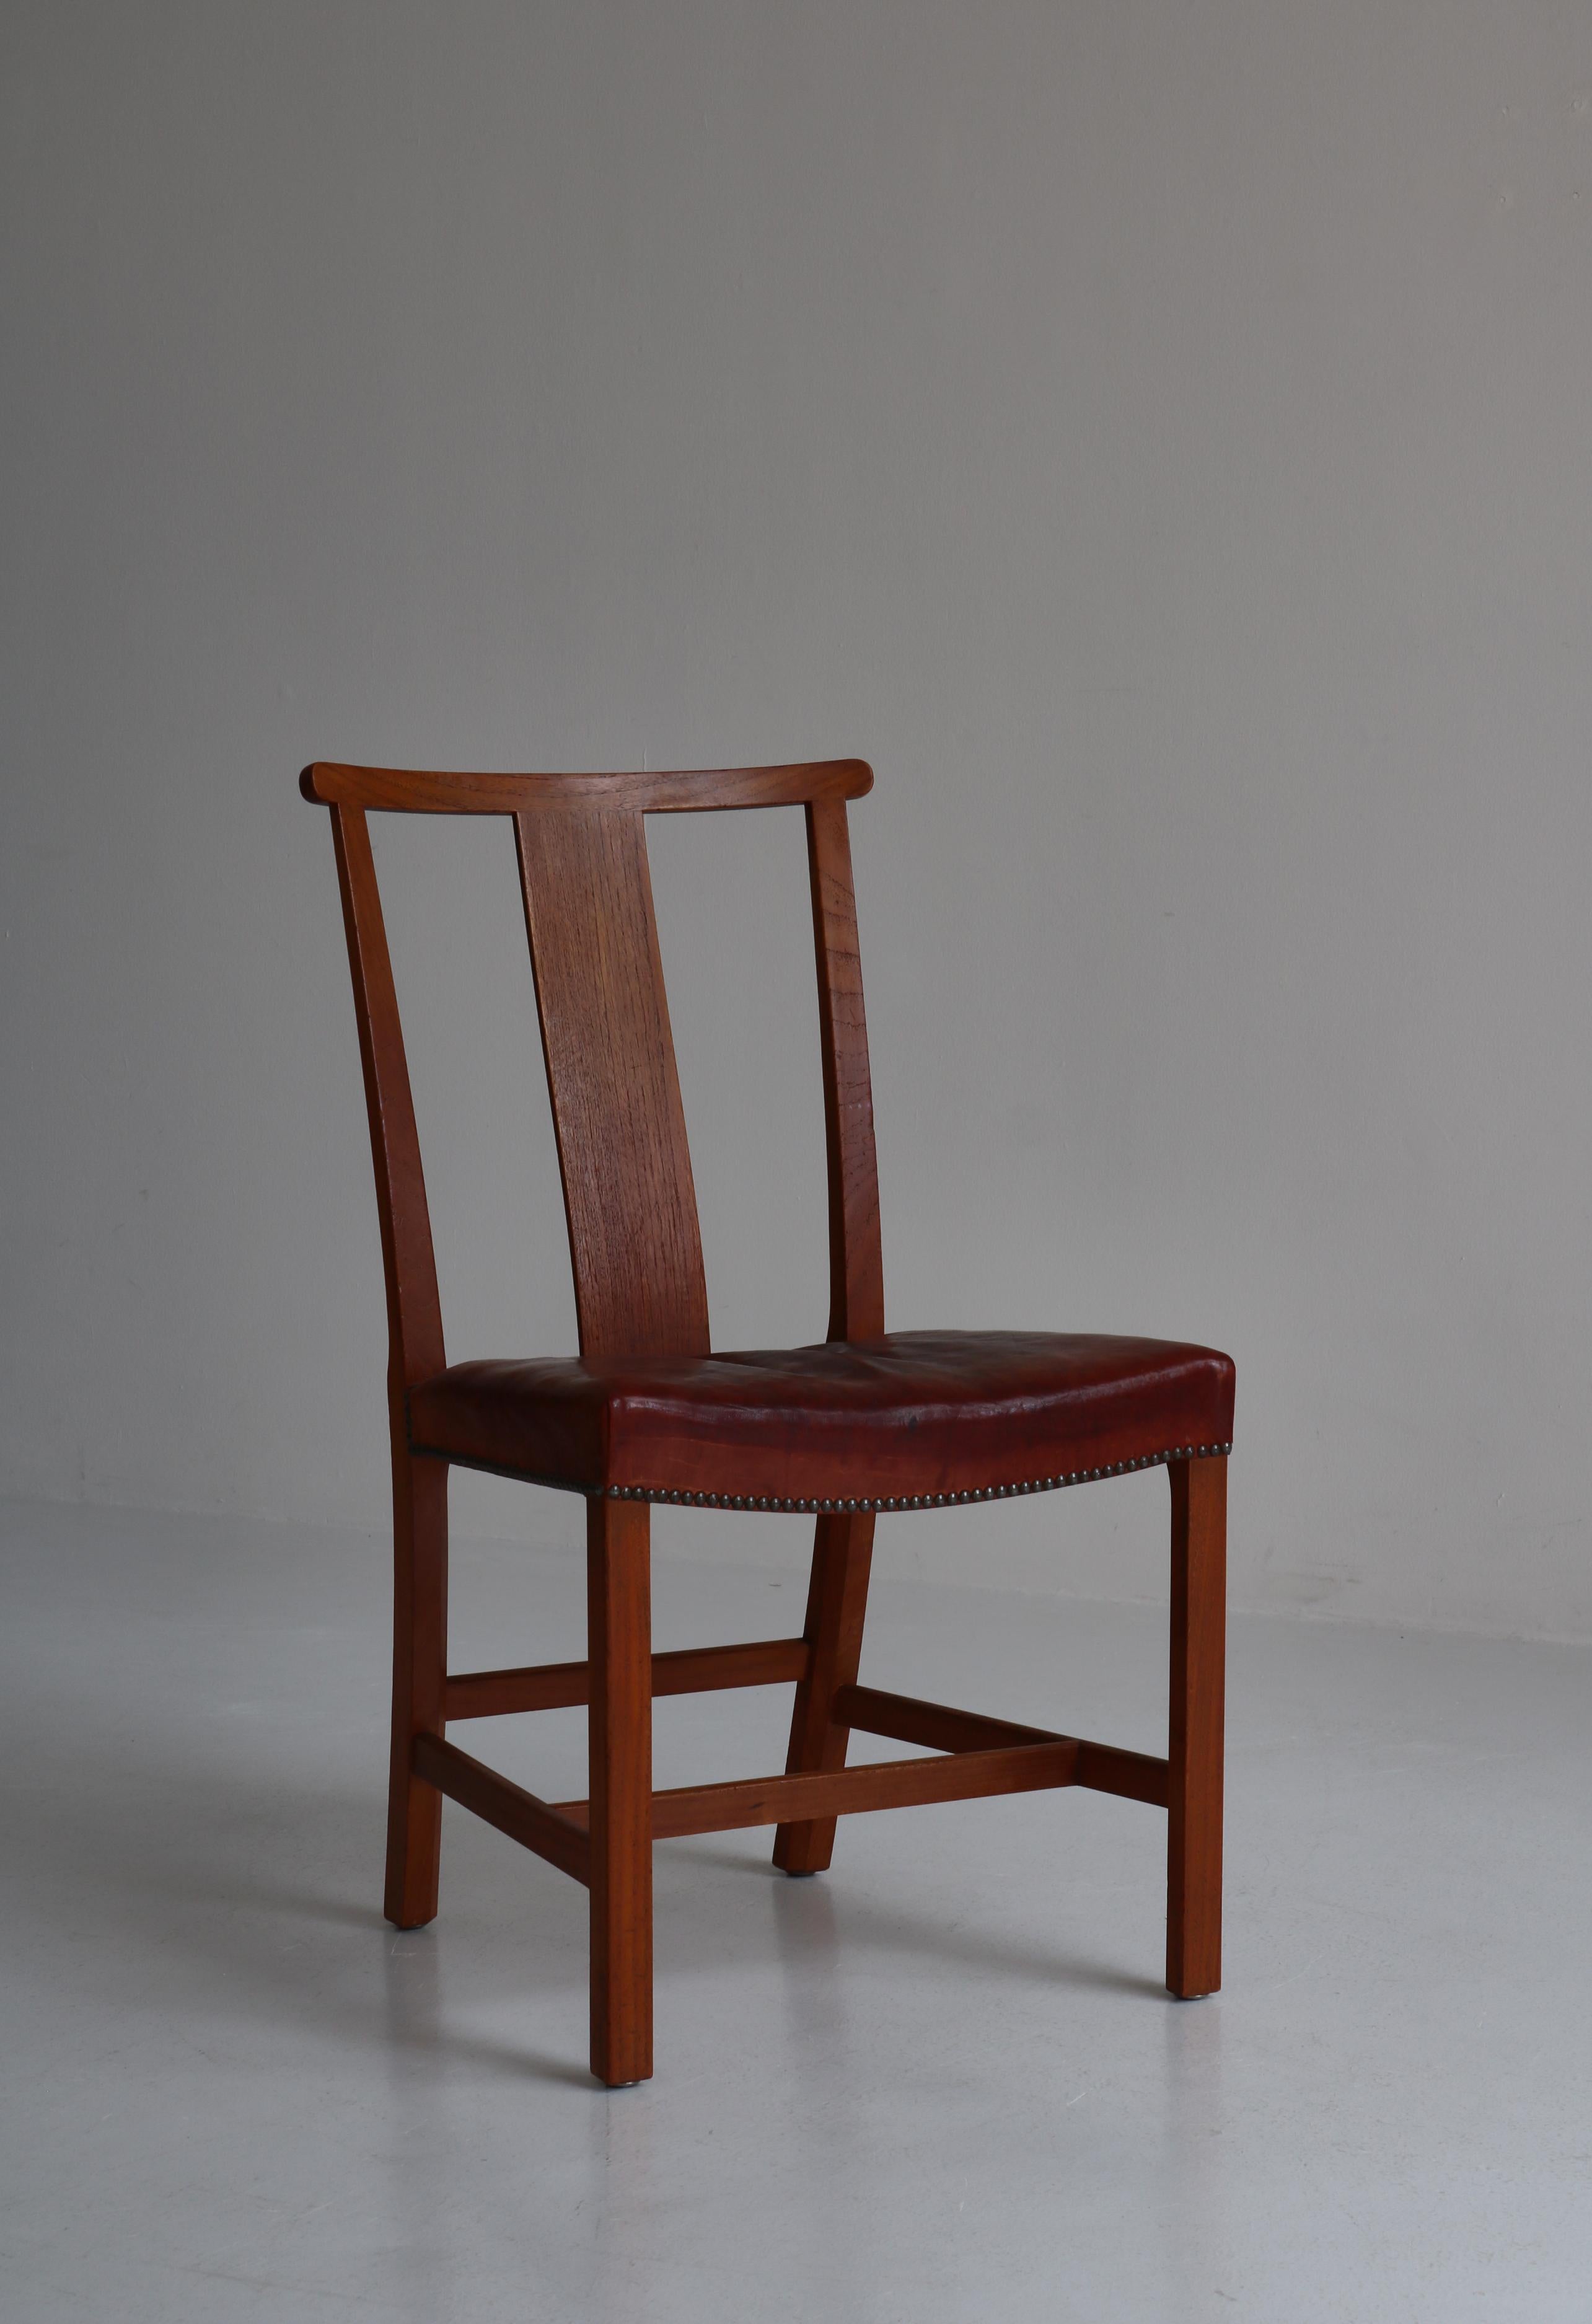 Set of Six Børge Mogensen Dining Chairs in Teak & Niger Leather, 1939, Denmark For Sale 8